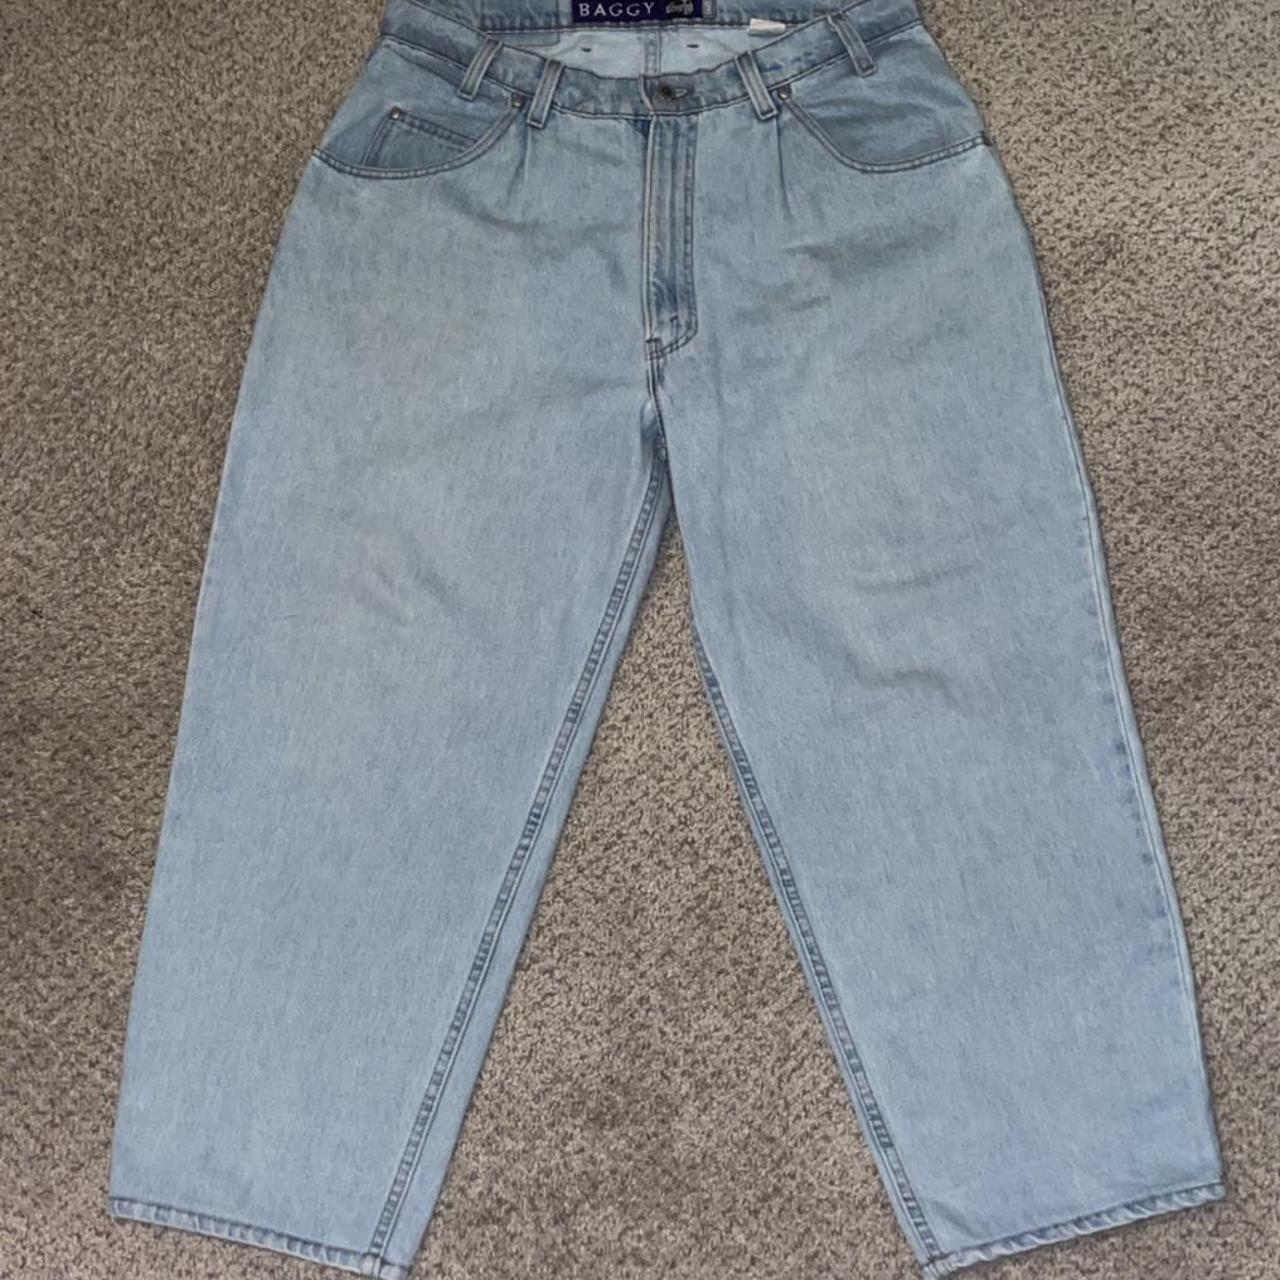 Product Image 1 - -Levi’s silvertab “baggy” jeans from